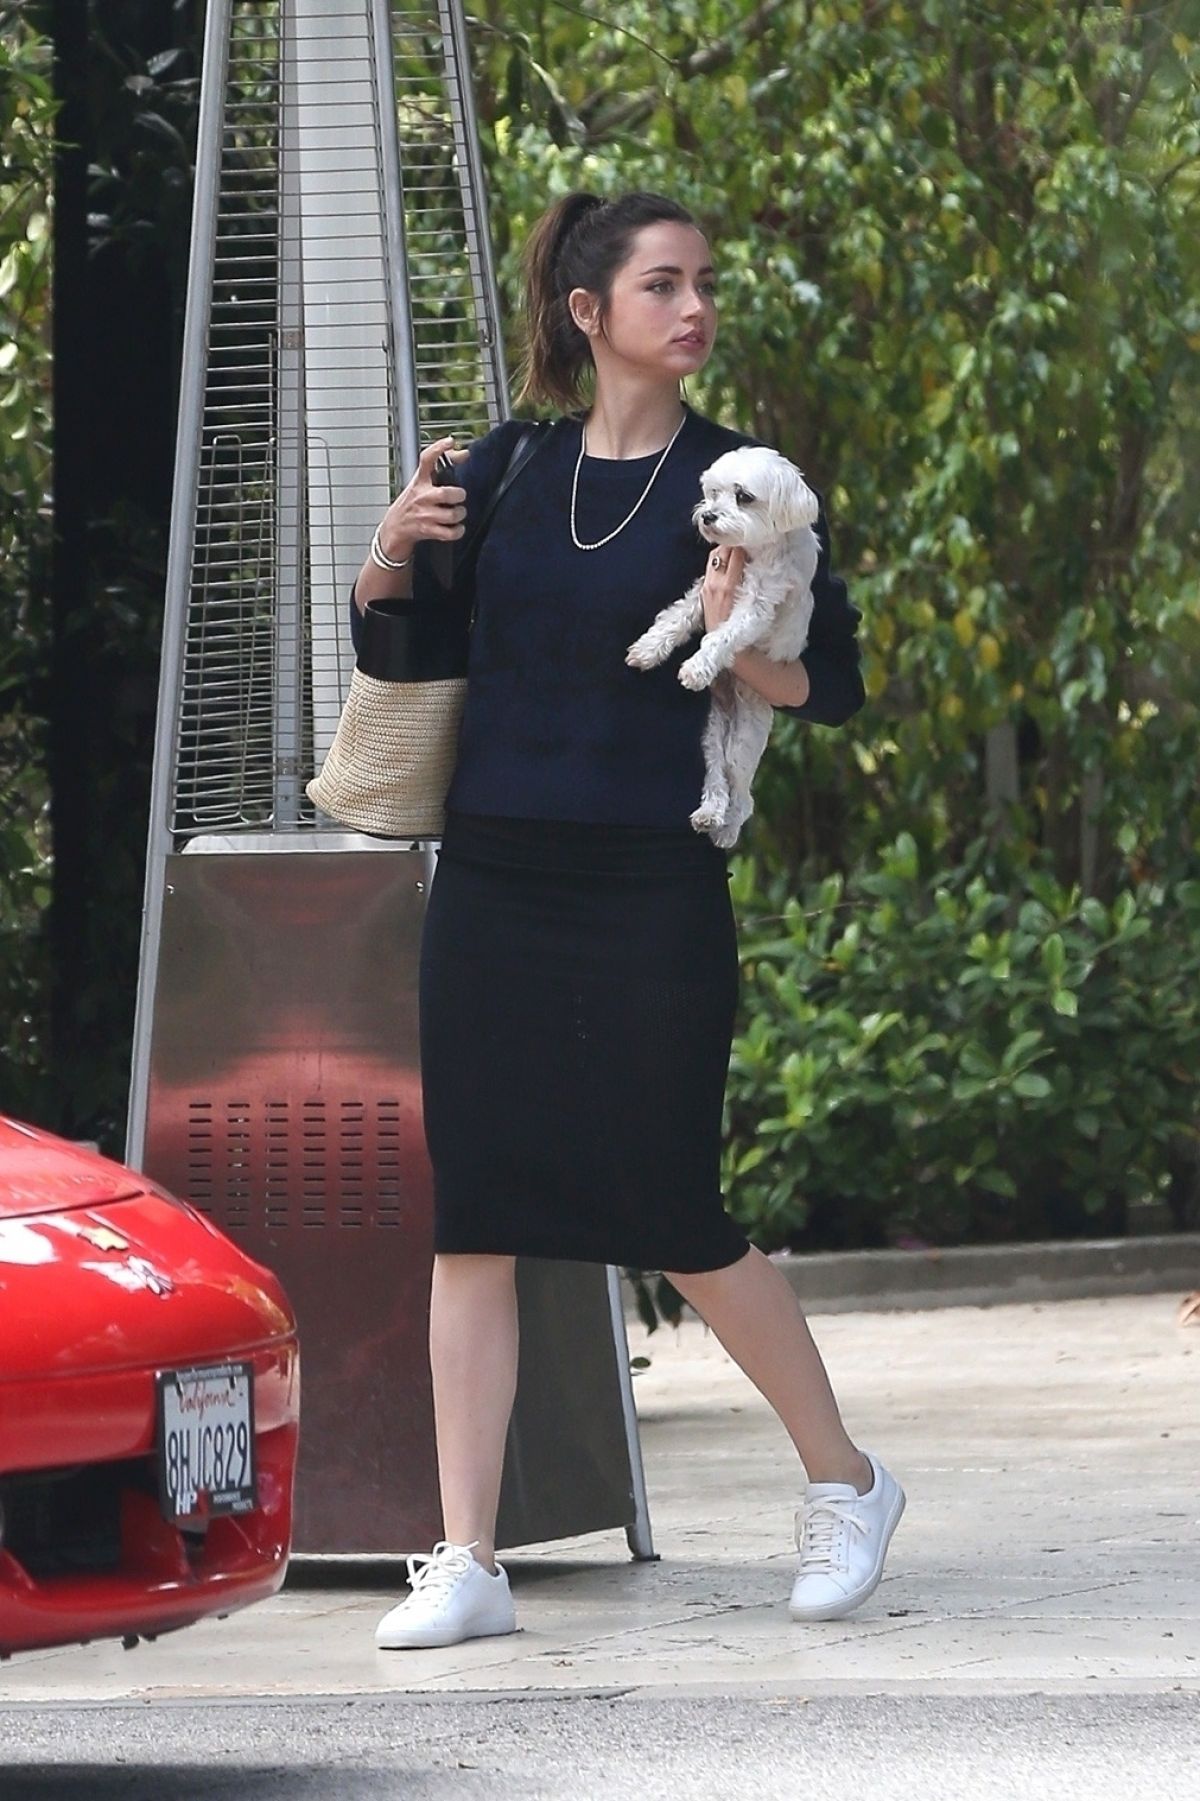 https://www.hawtcelebs.com/wp-content/uploads/2020/03/ana-de-armas-out-with-her-dog-in-los-angeles-03-15-2020-6.jpg